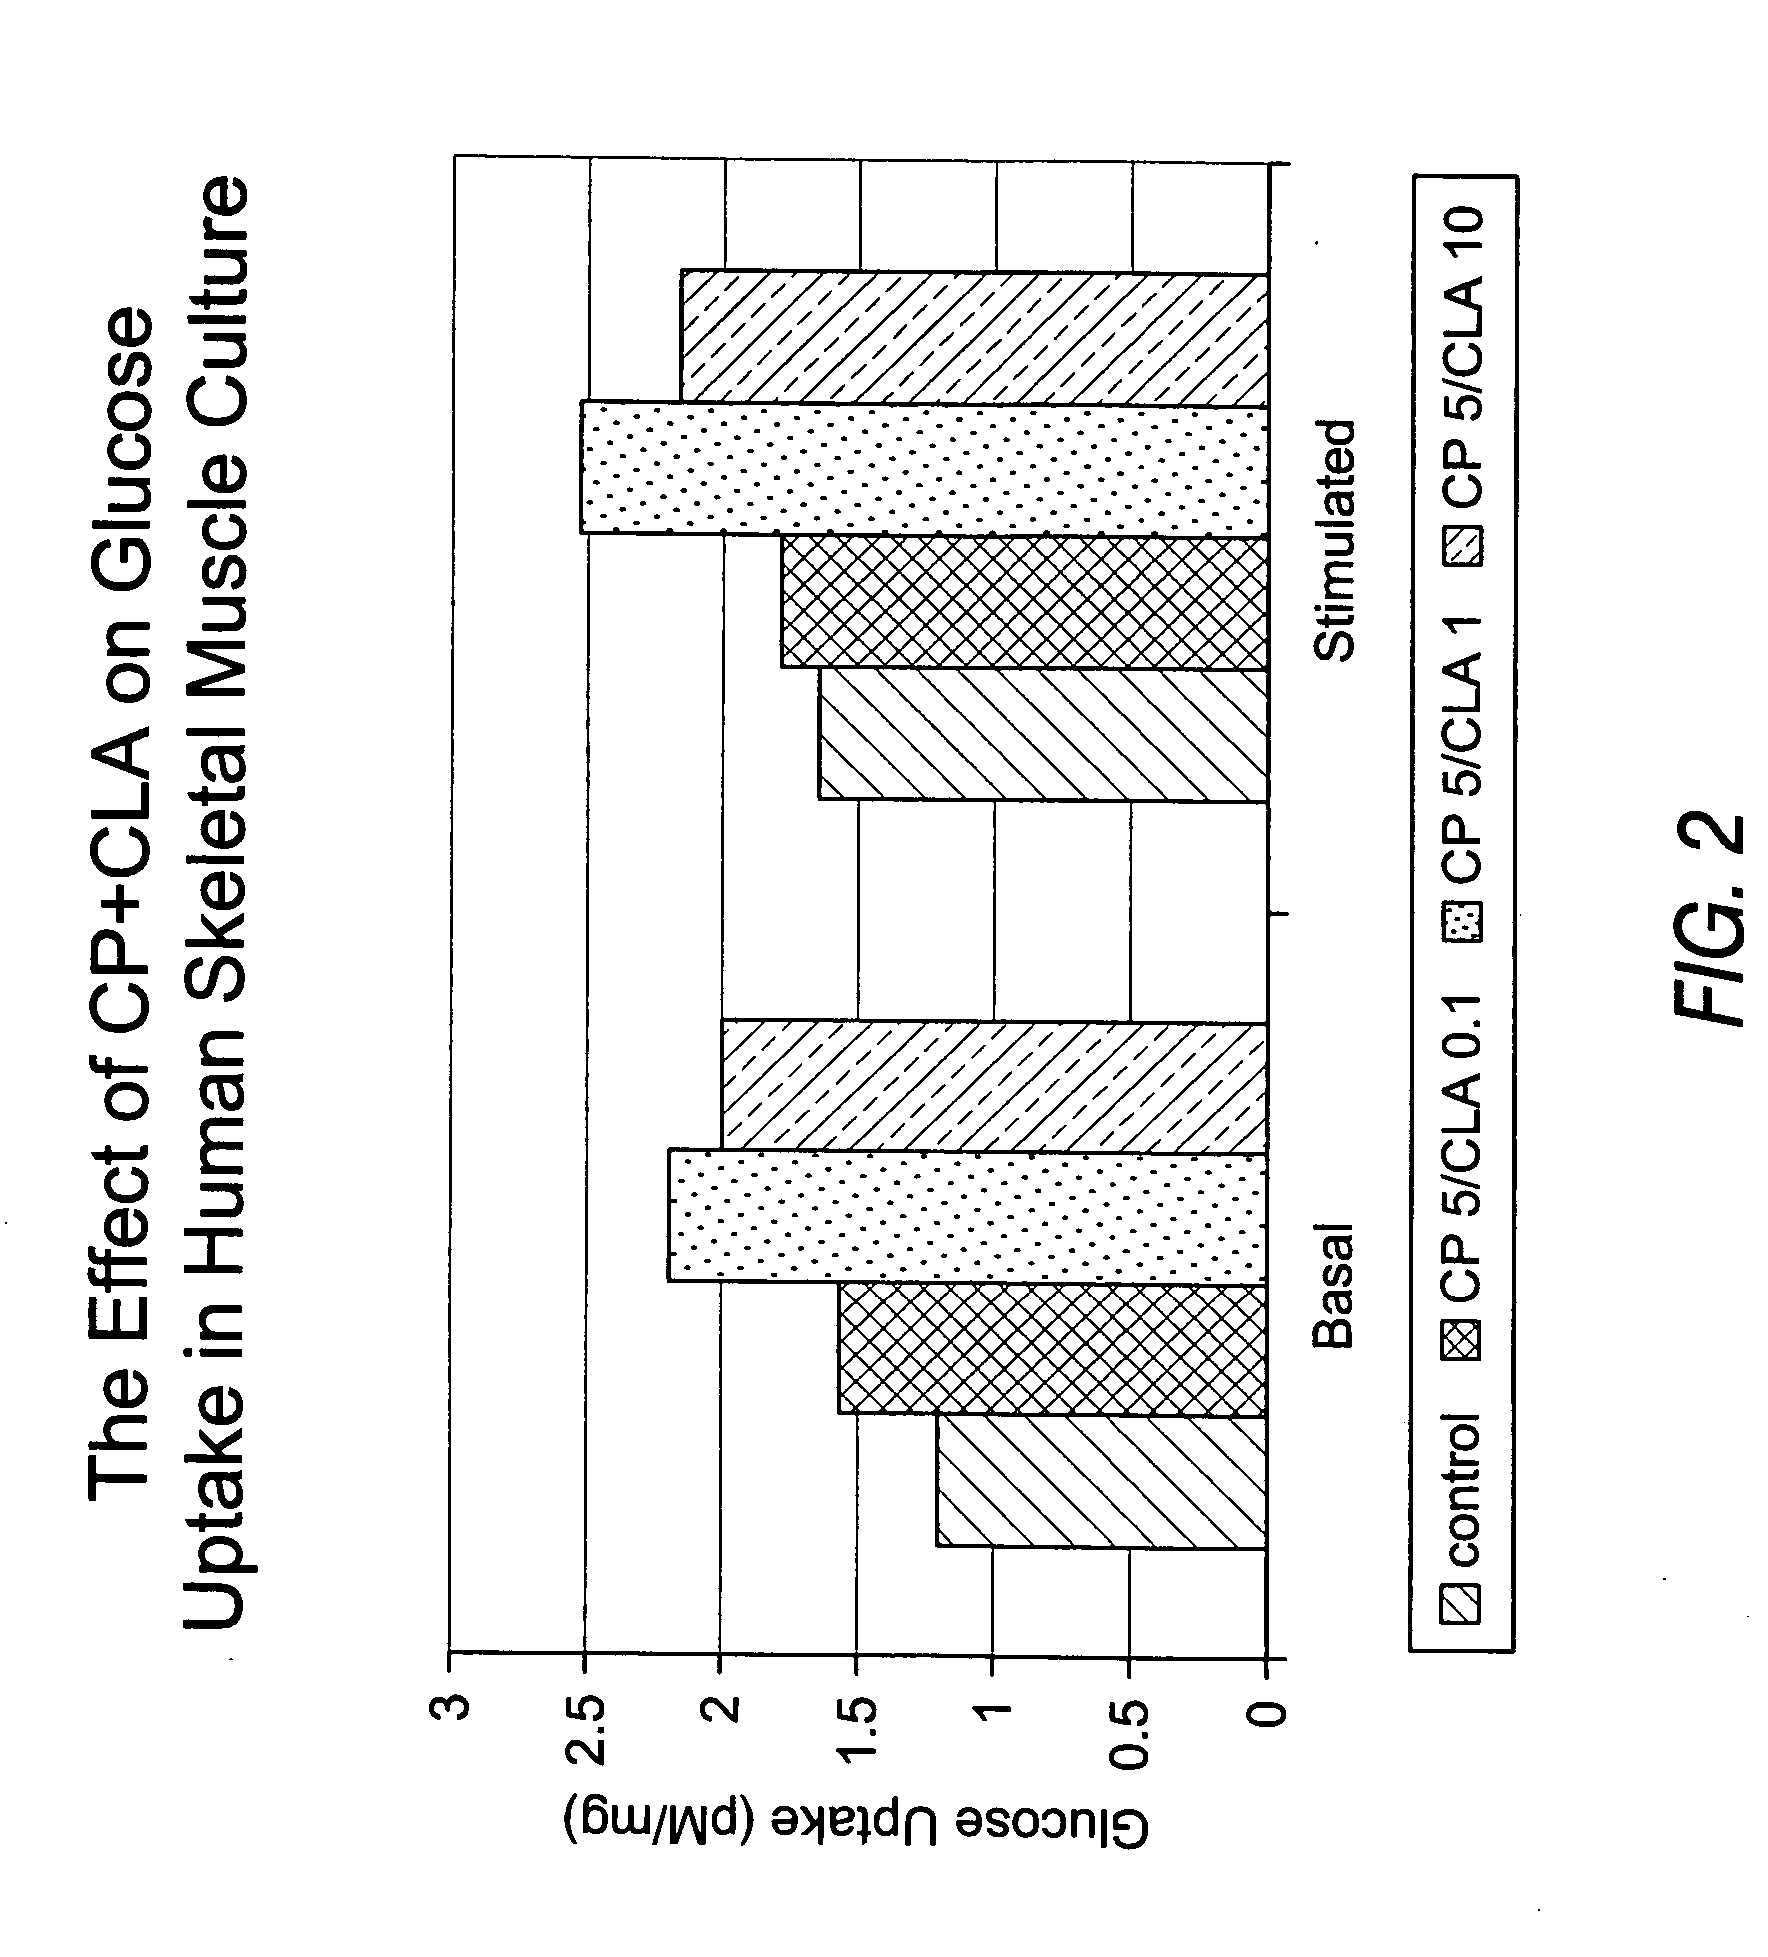 Methods for the treatment of diabetes, the reduction of body fat, improvement of insulin sensitivity, reduction of hyperglycemia, and reduction of hypercholesterolemia with chromium complexes, conjugated fatty acids, and/or conjugated fatty alcohols